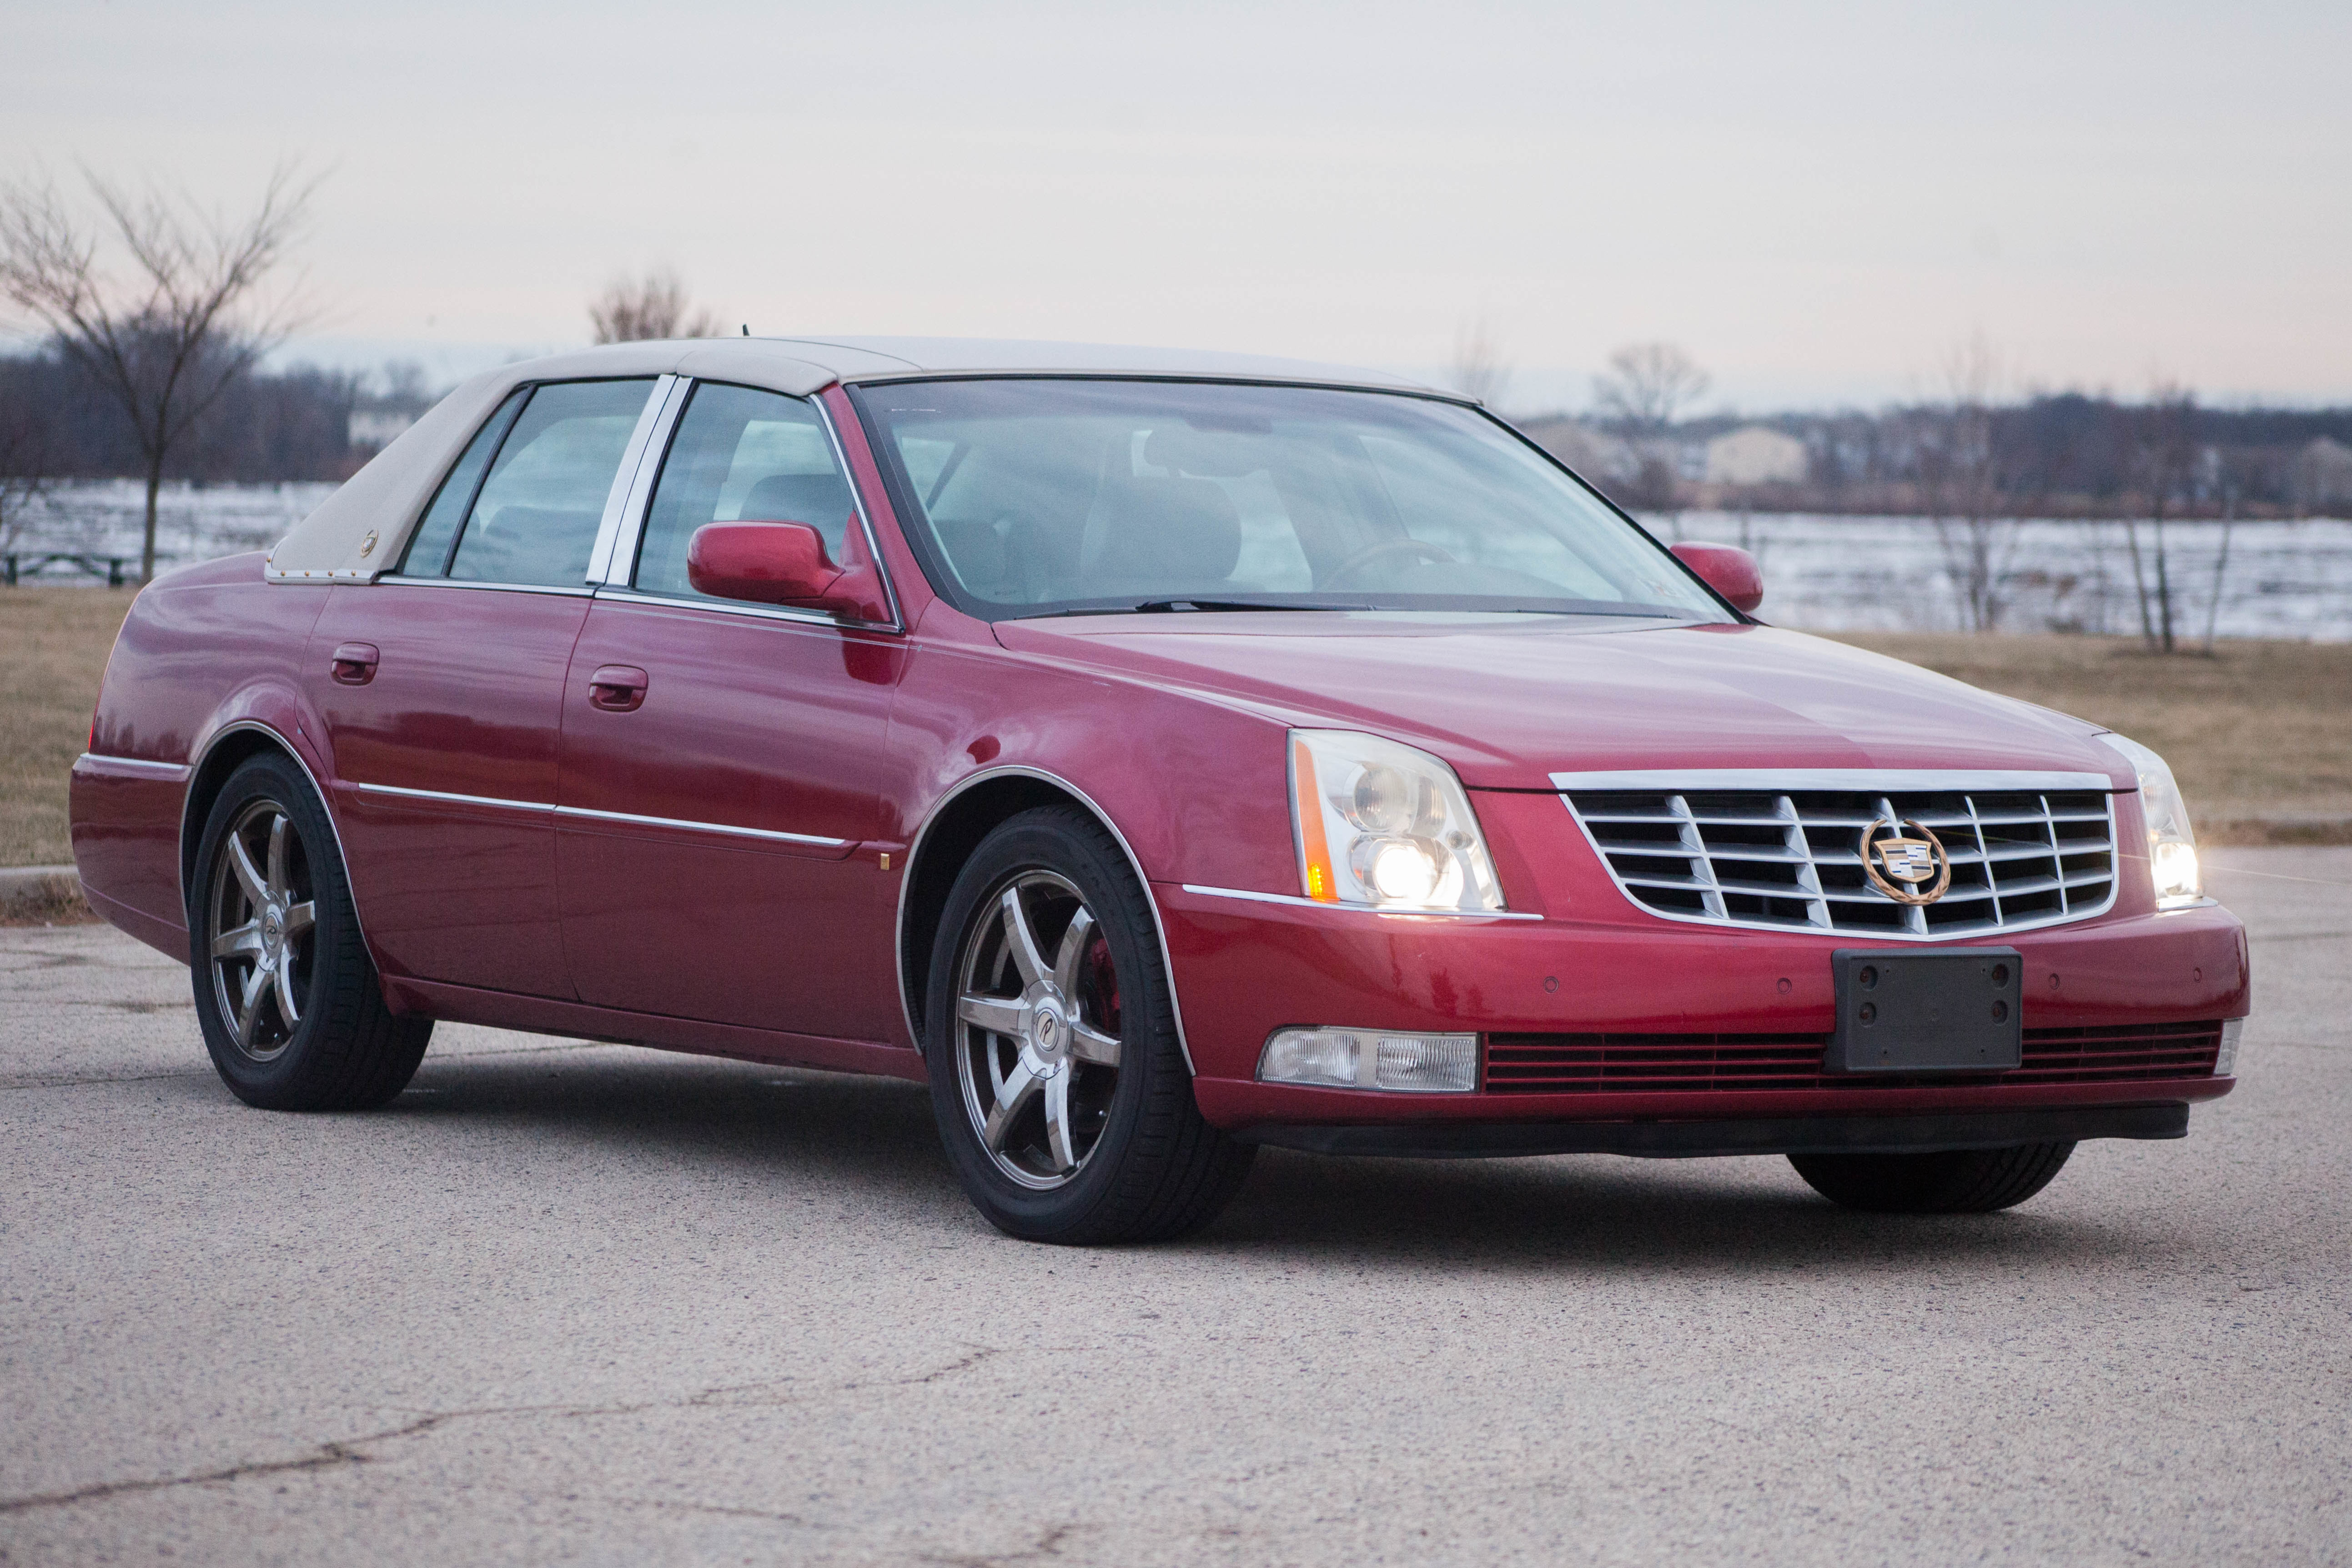 2006 Used Cadillac DTS For sale | Car Dealership in Philadelphia